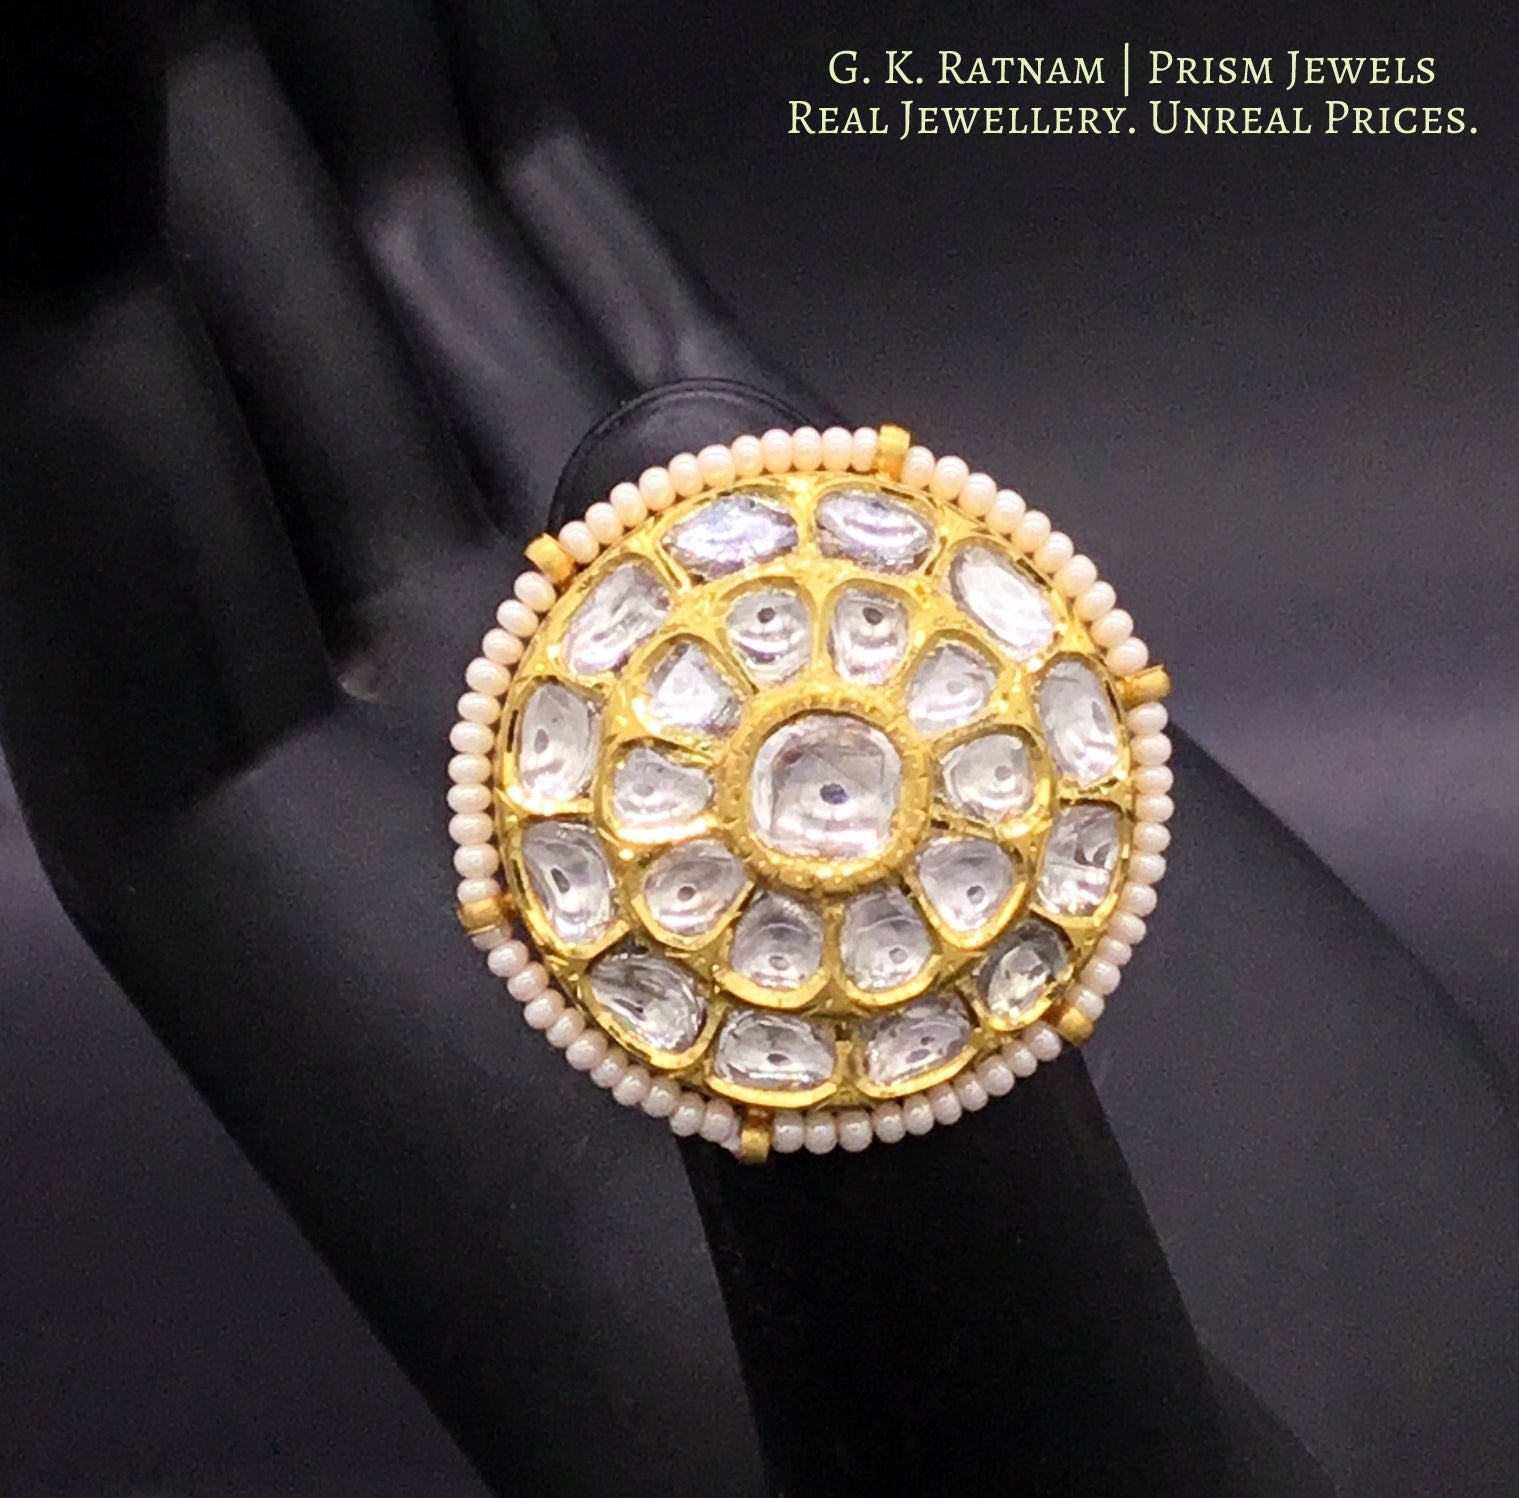 18k Gold and Diamond Polki Round Ring with Chid Pearl Outlining - G. K. Ratnam